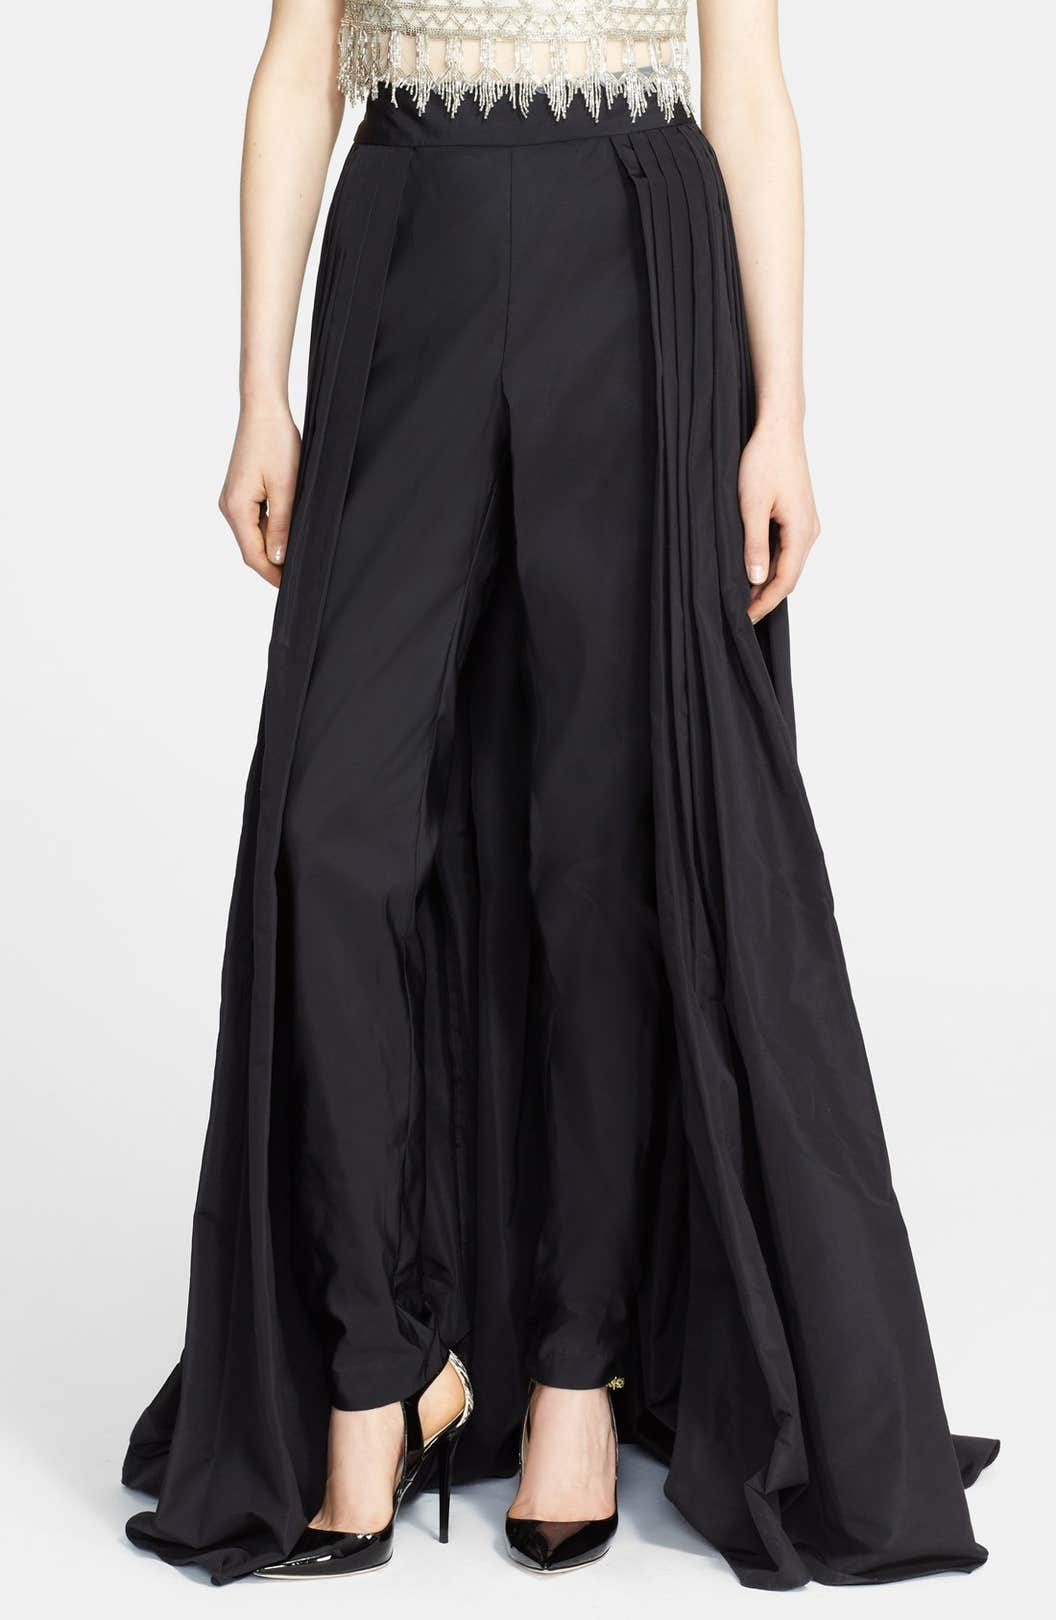 Naeem Khan Silk Faille Ball Skirt with Attached Cigarette Pants | Nordstrom